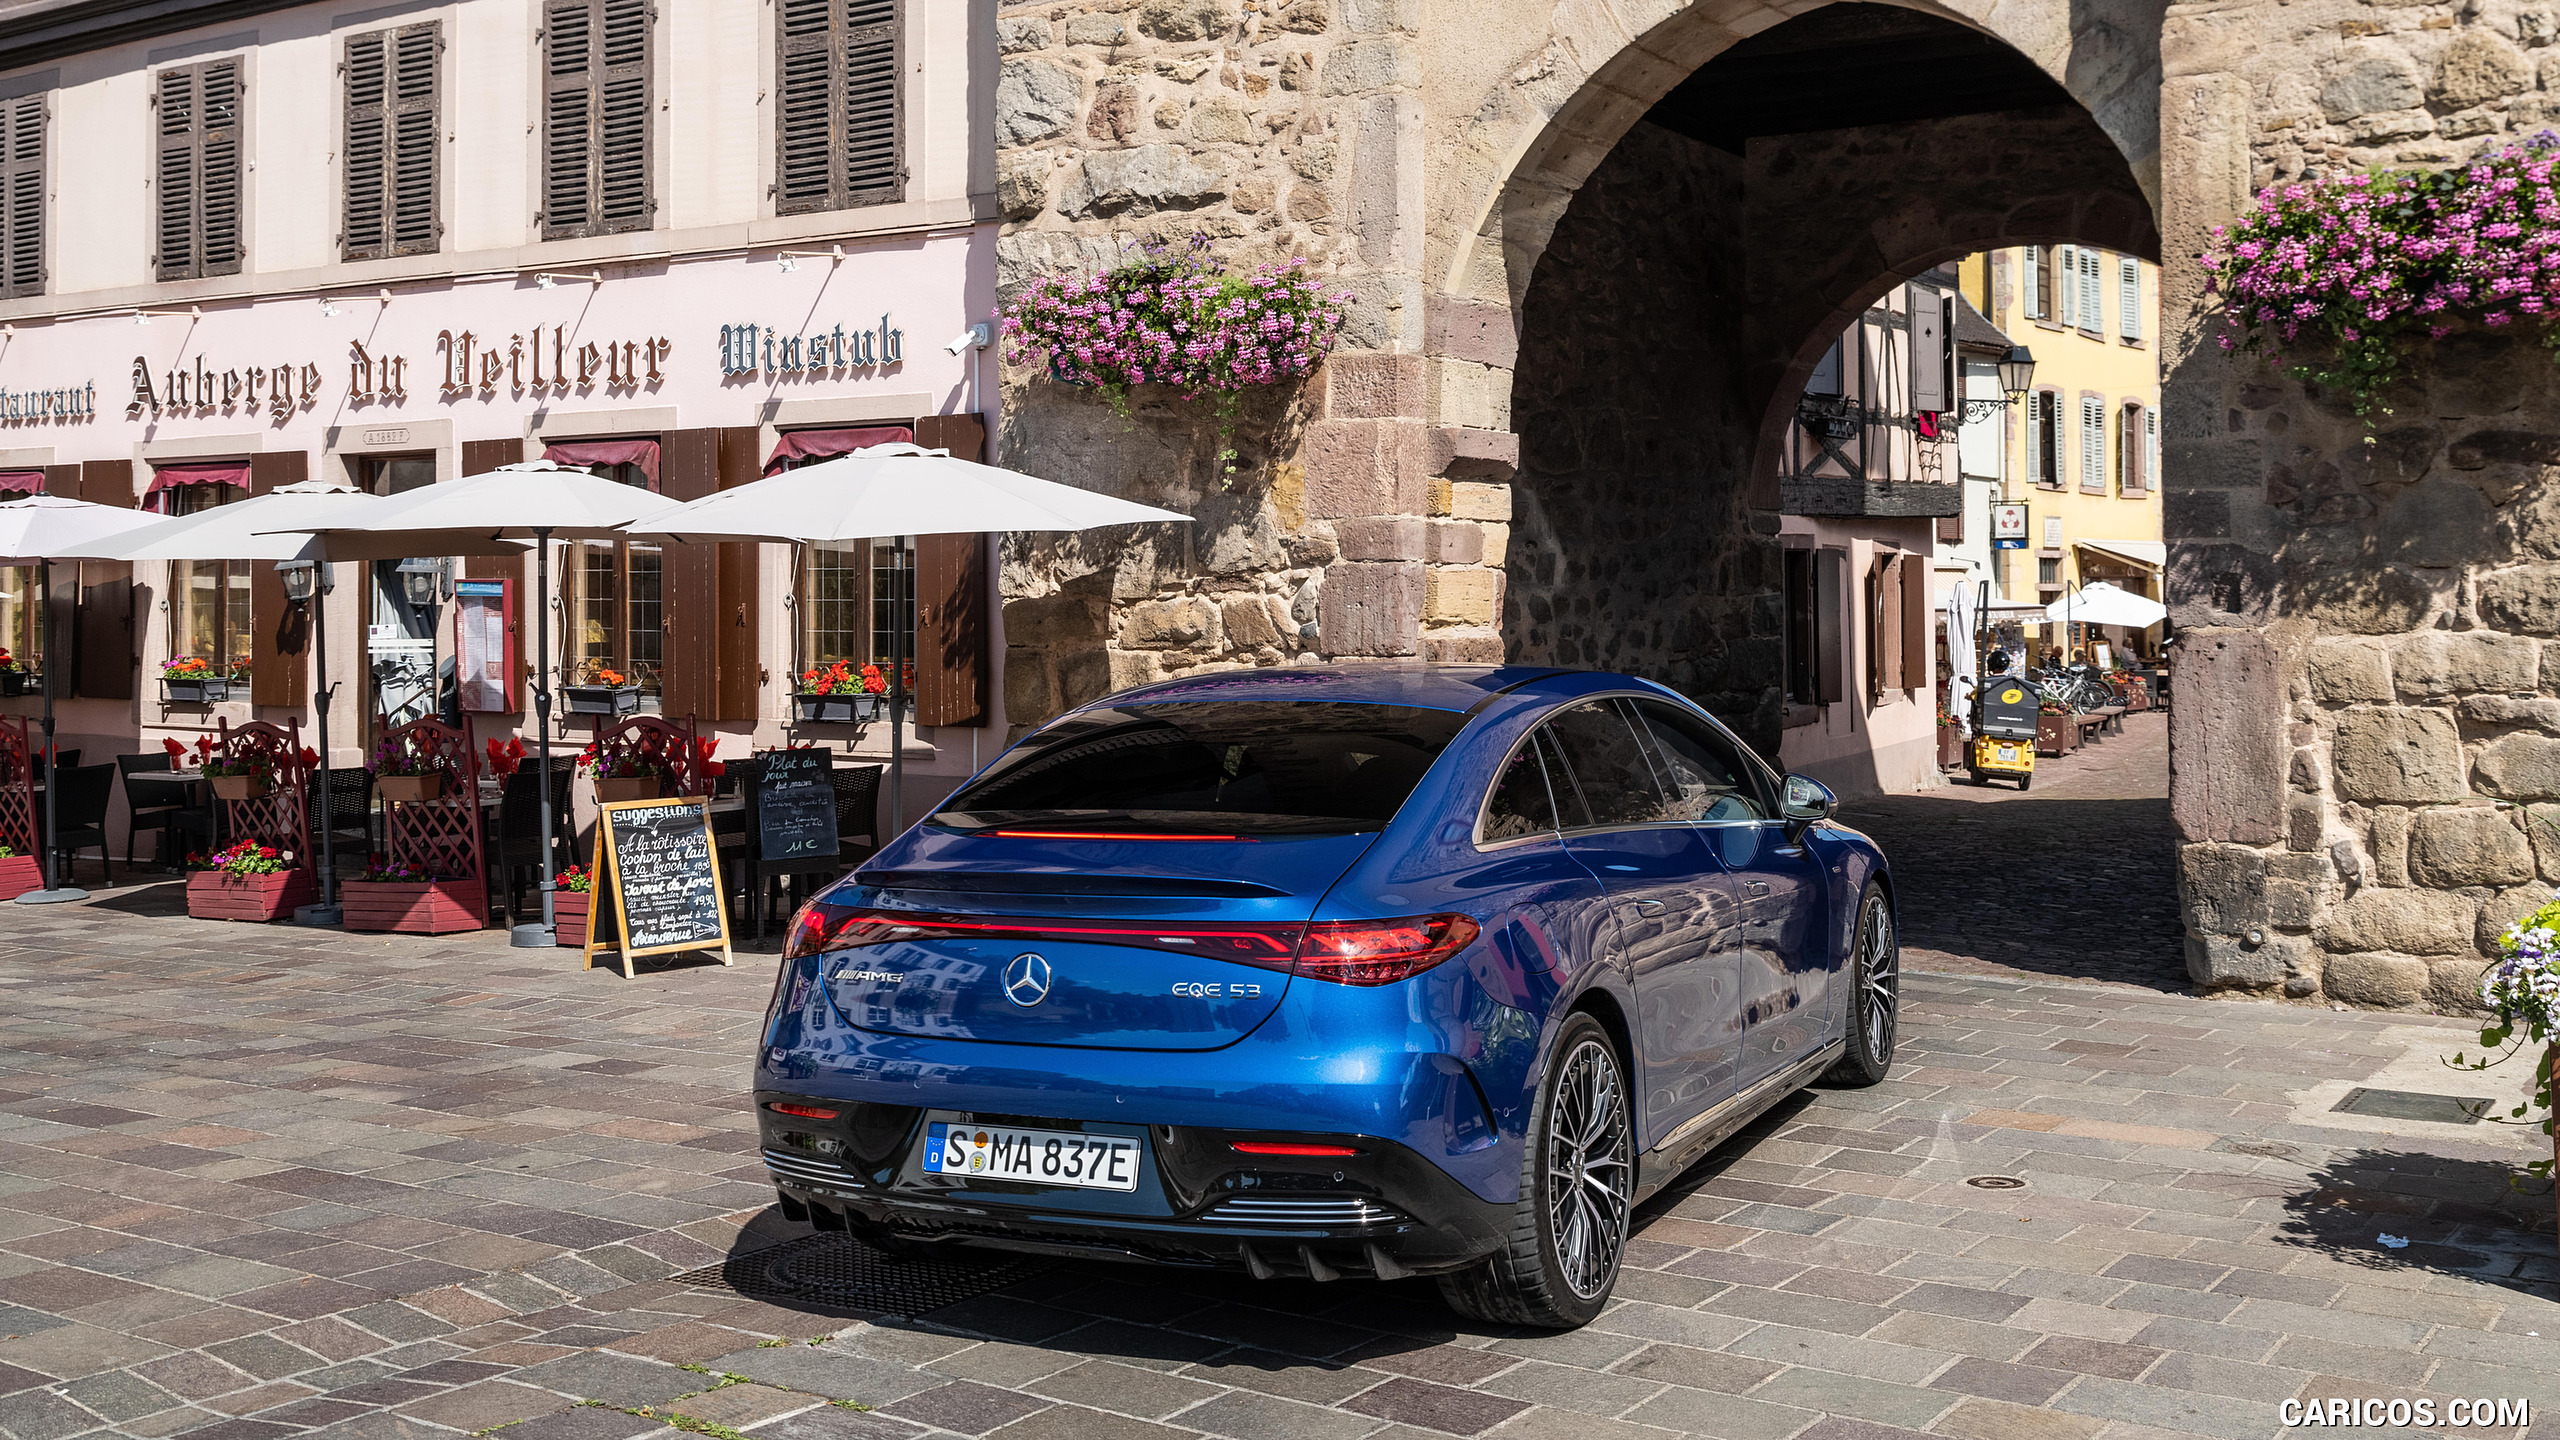 2023 Mercedes-AMG EQE 53 4MATIC+ (Color: Spectral Blue) - Rear, #197 of 239